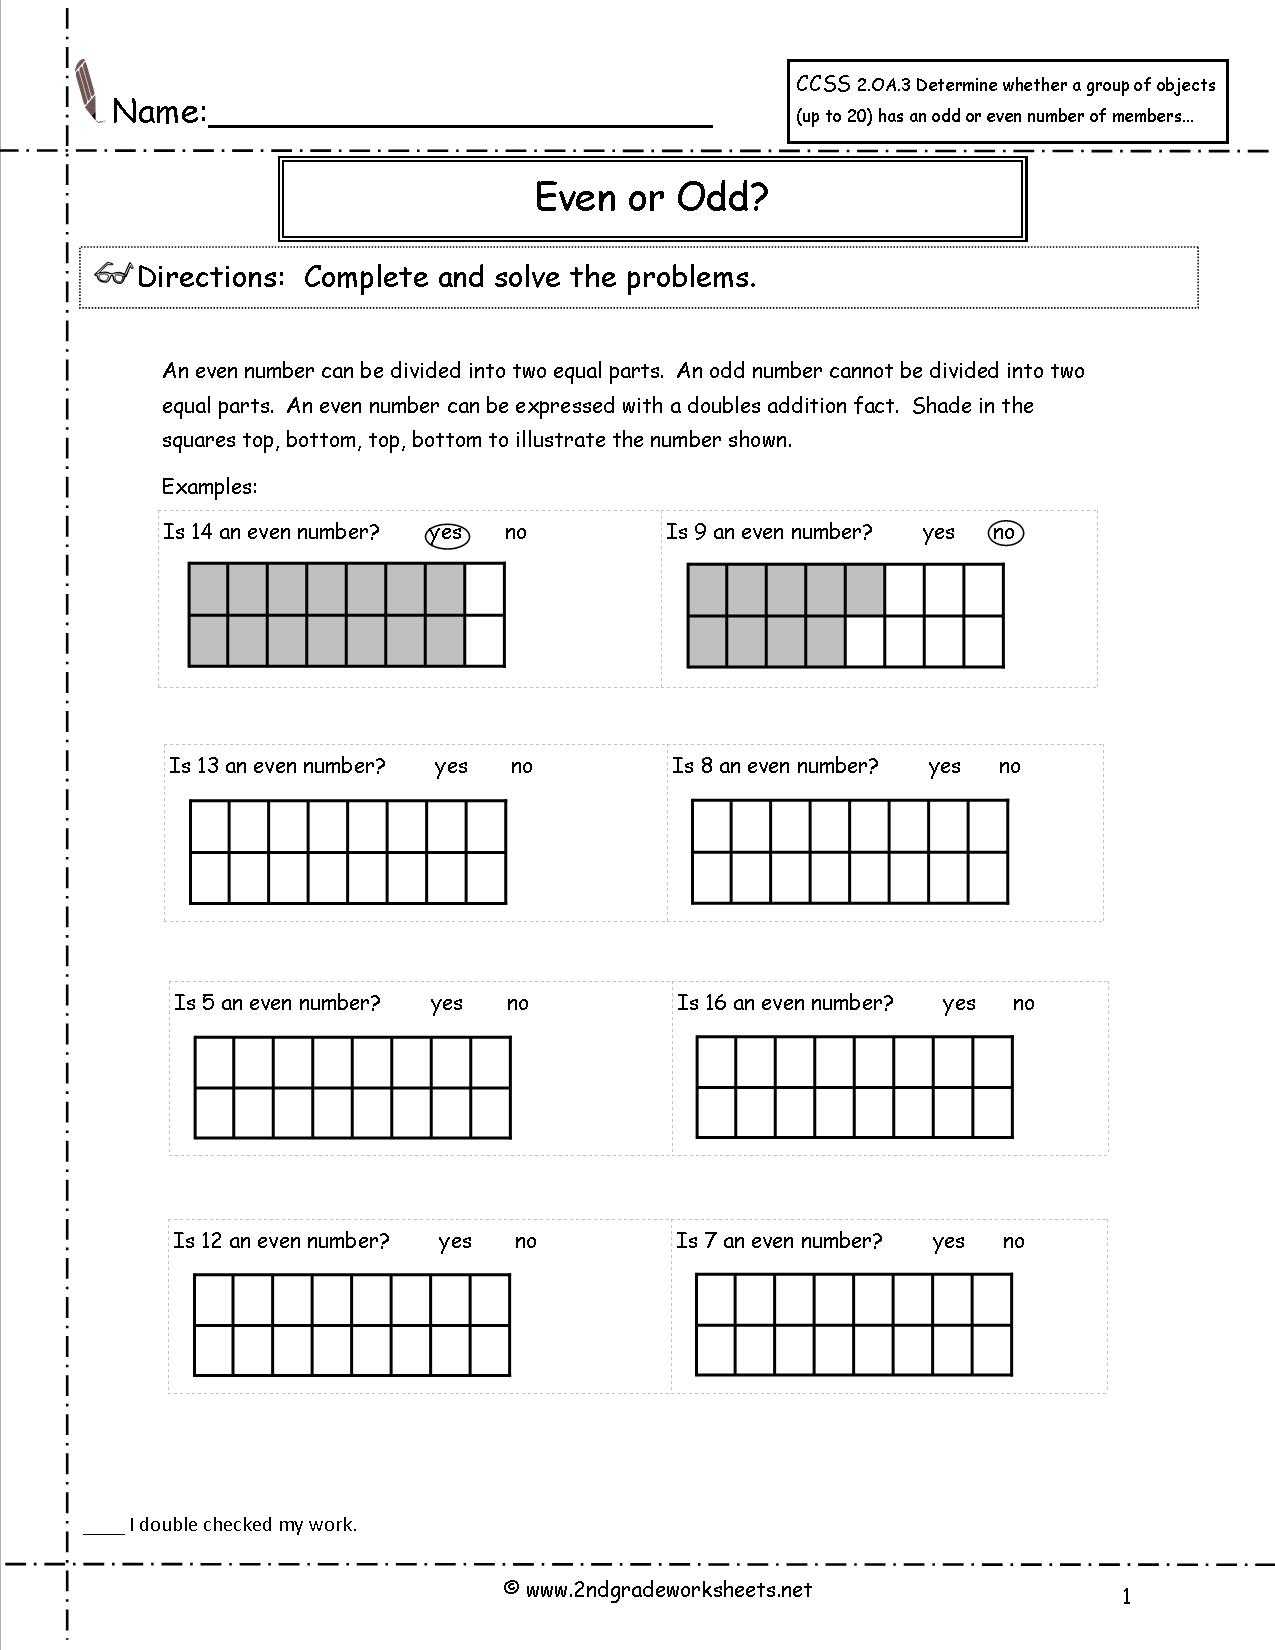 Solubility Curve Practice Problems Worksheet as Well as Mon Core Math Grade 2 Worksheets for All